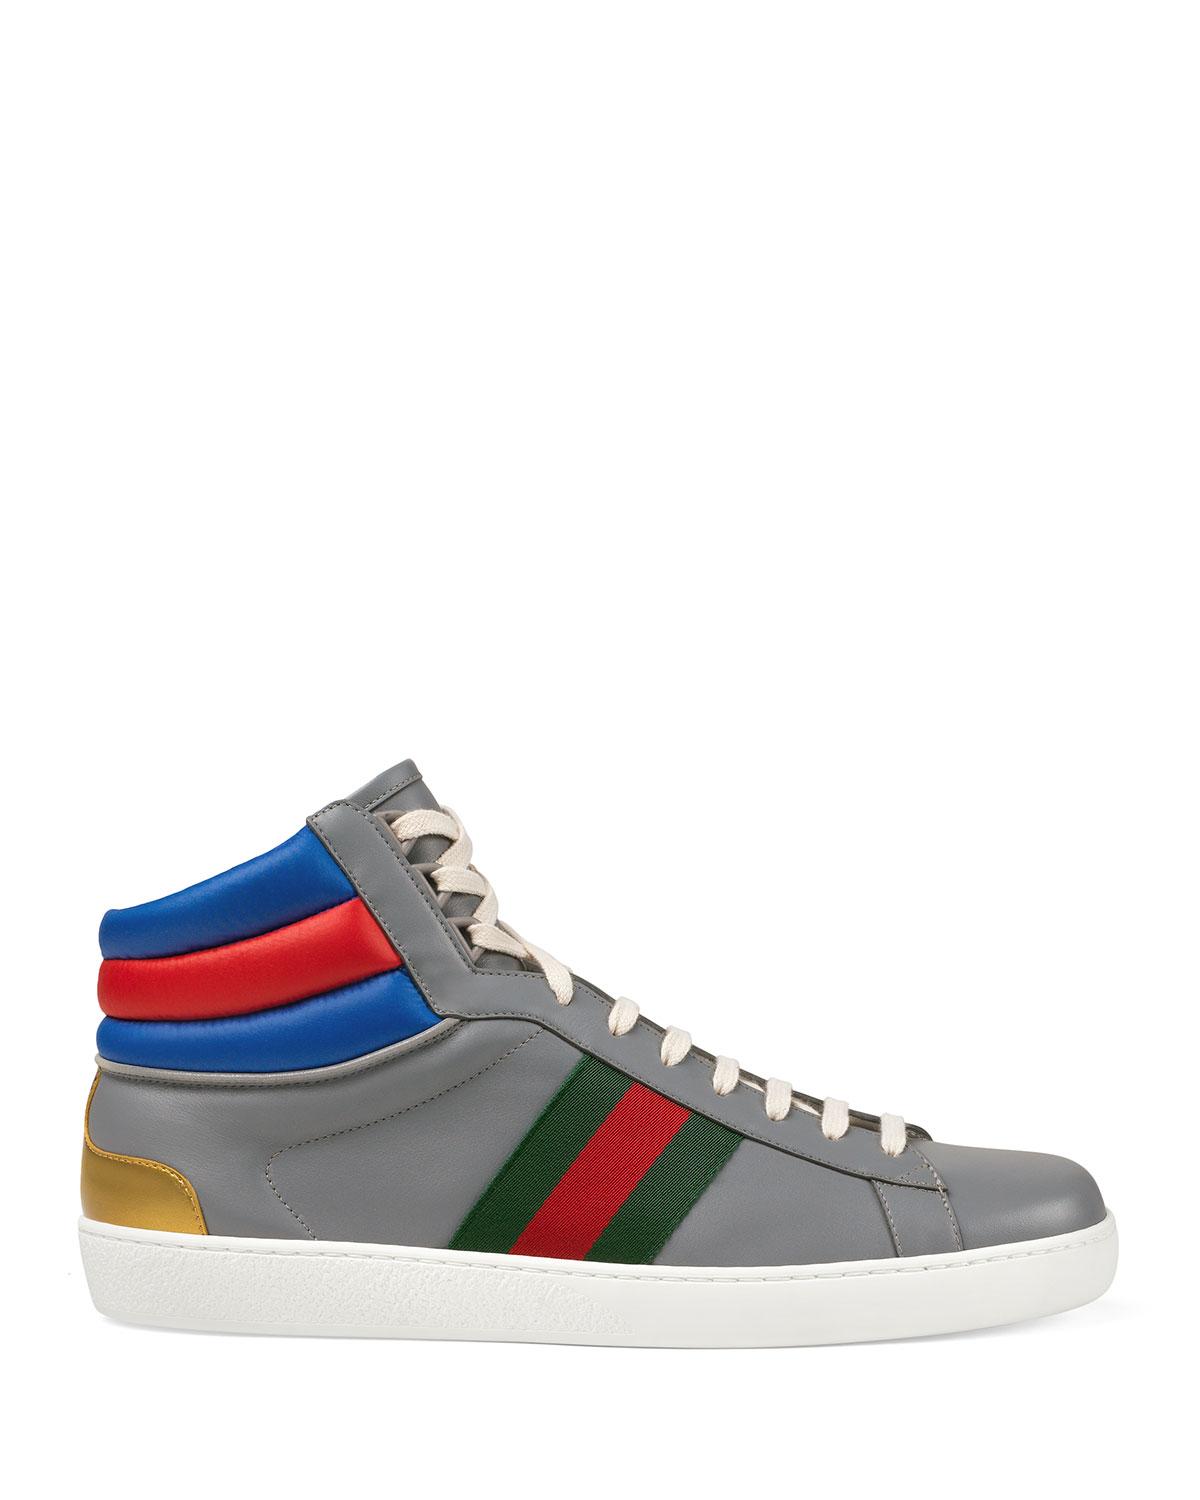 Gucci Men's Ace Colorblock Leather High-top Sneakers for Men - Lyst